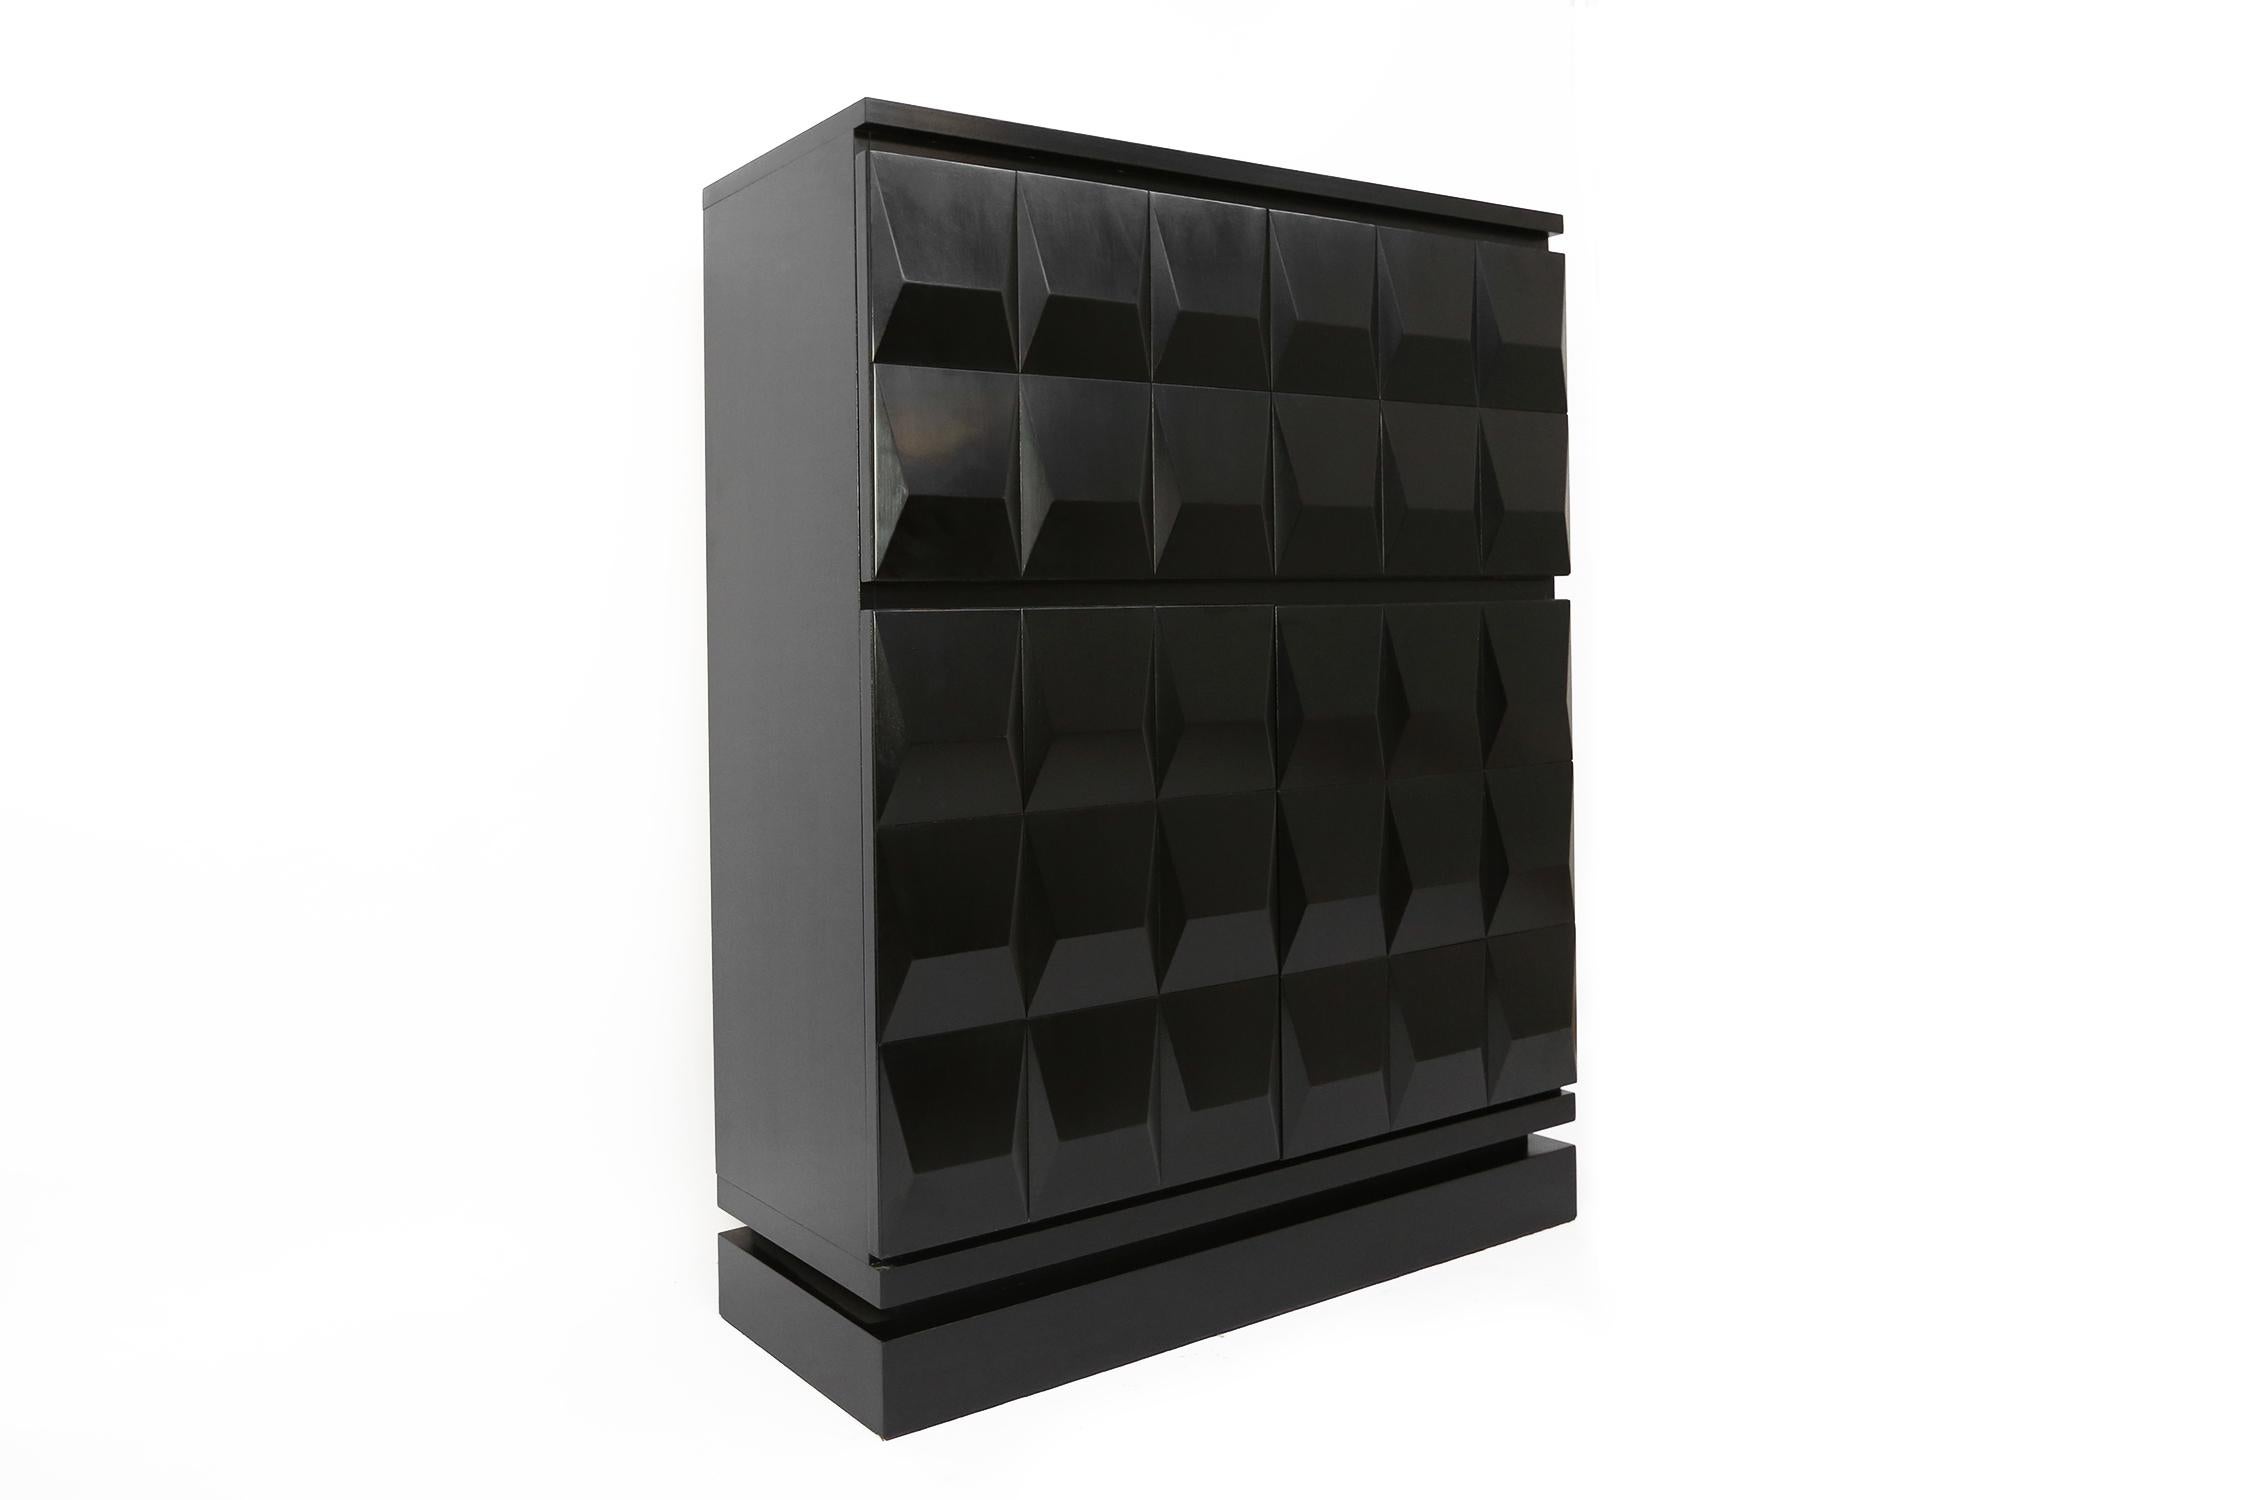 Beautifull graphical black Brutalist highboard made in the seventies in Belgium. This cabinet has a well crafted graphic pattern and was made in solid ebonized black lacquered mahogany. The high quality wood and symetric design and pattern add to